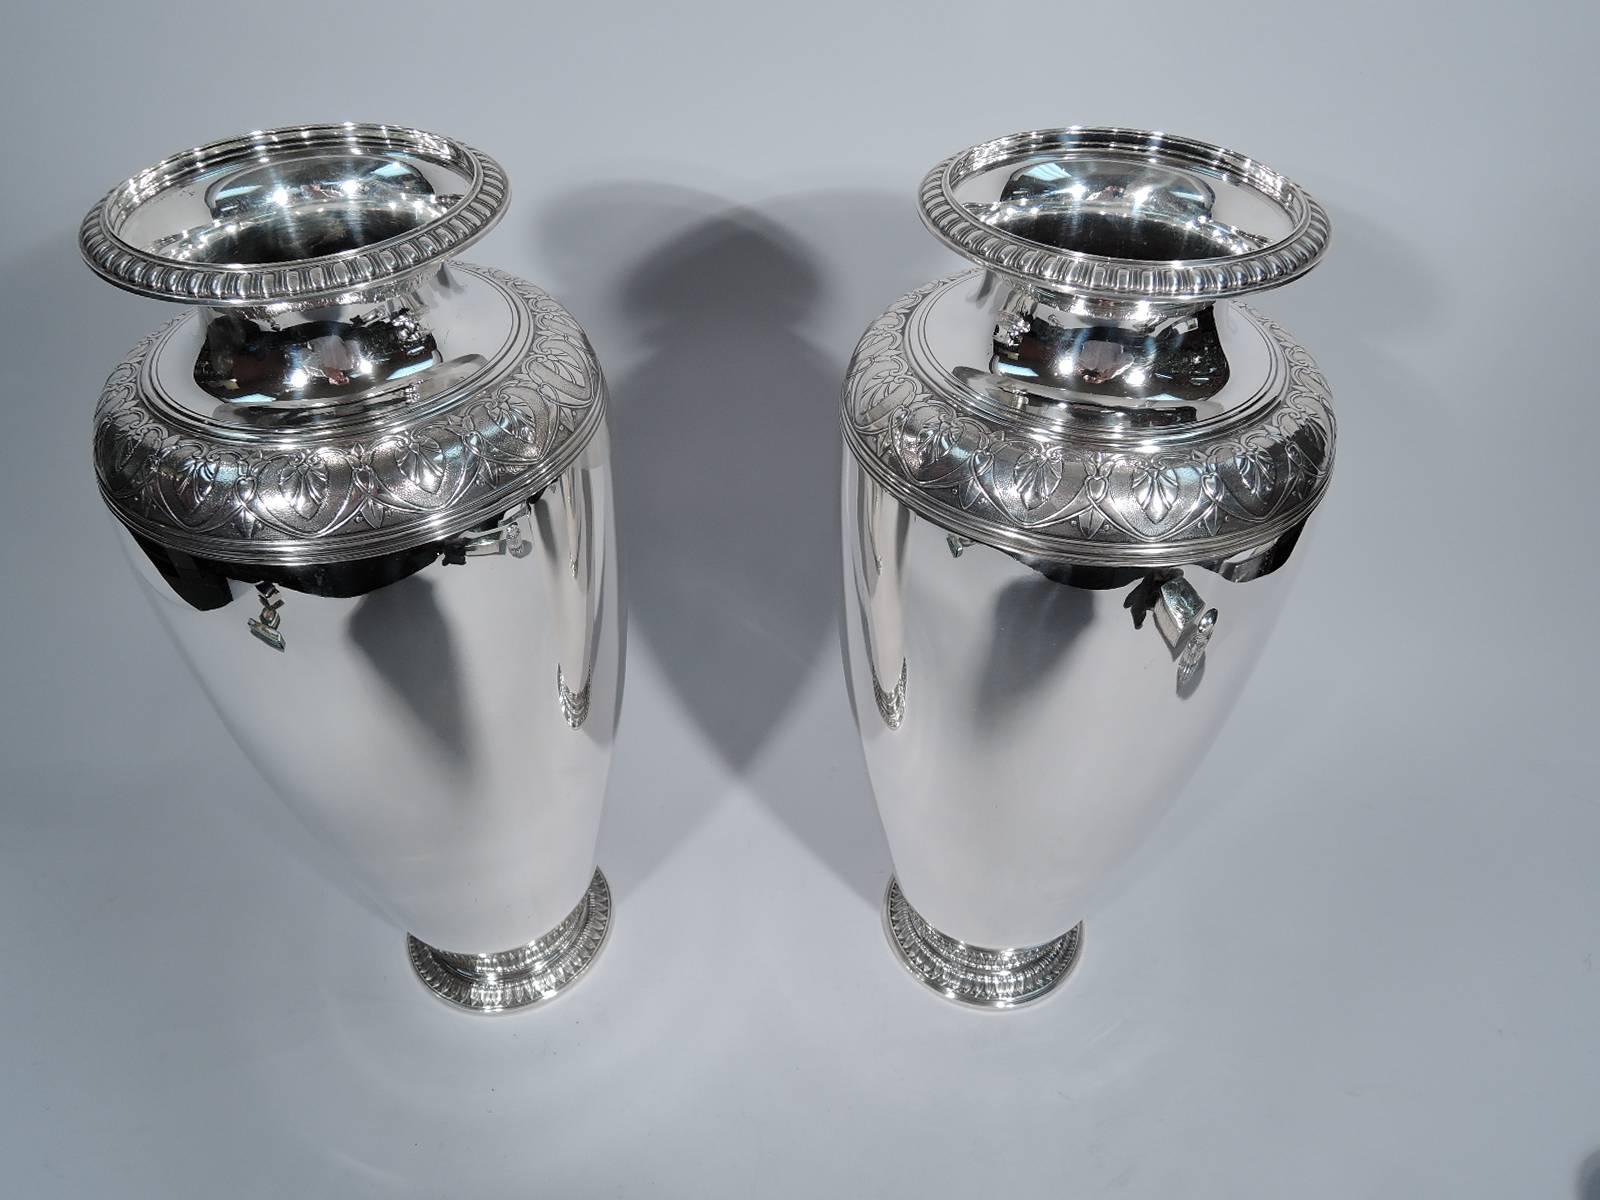 Pair of sterling silver vases. Made by Tiffany & Co. in New York, ca 1920. Each: baluster with curved shoulder, spread foot, short neck, and flared rim. Body and neck plain with contrasting stylized ornament: Classical leaf-and-dart on foot and